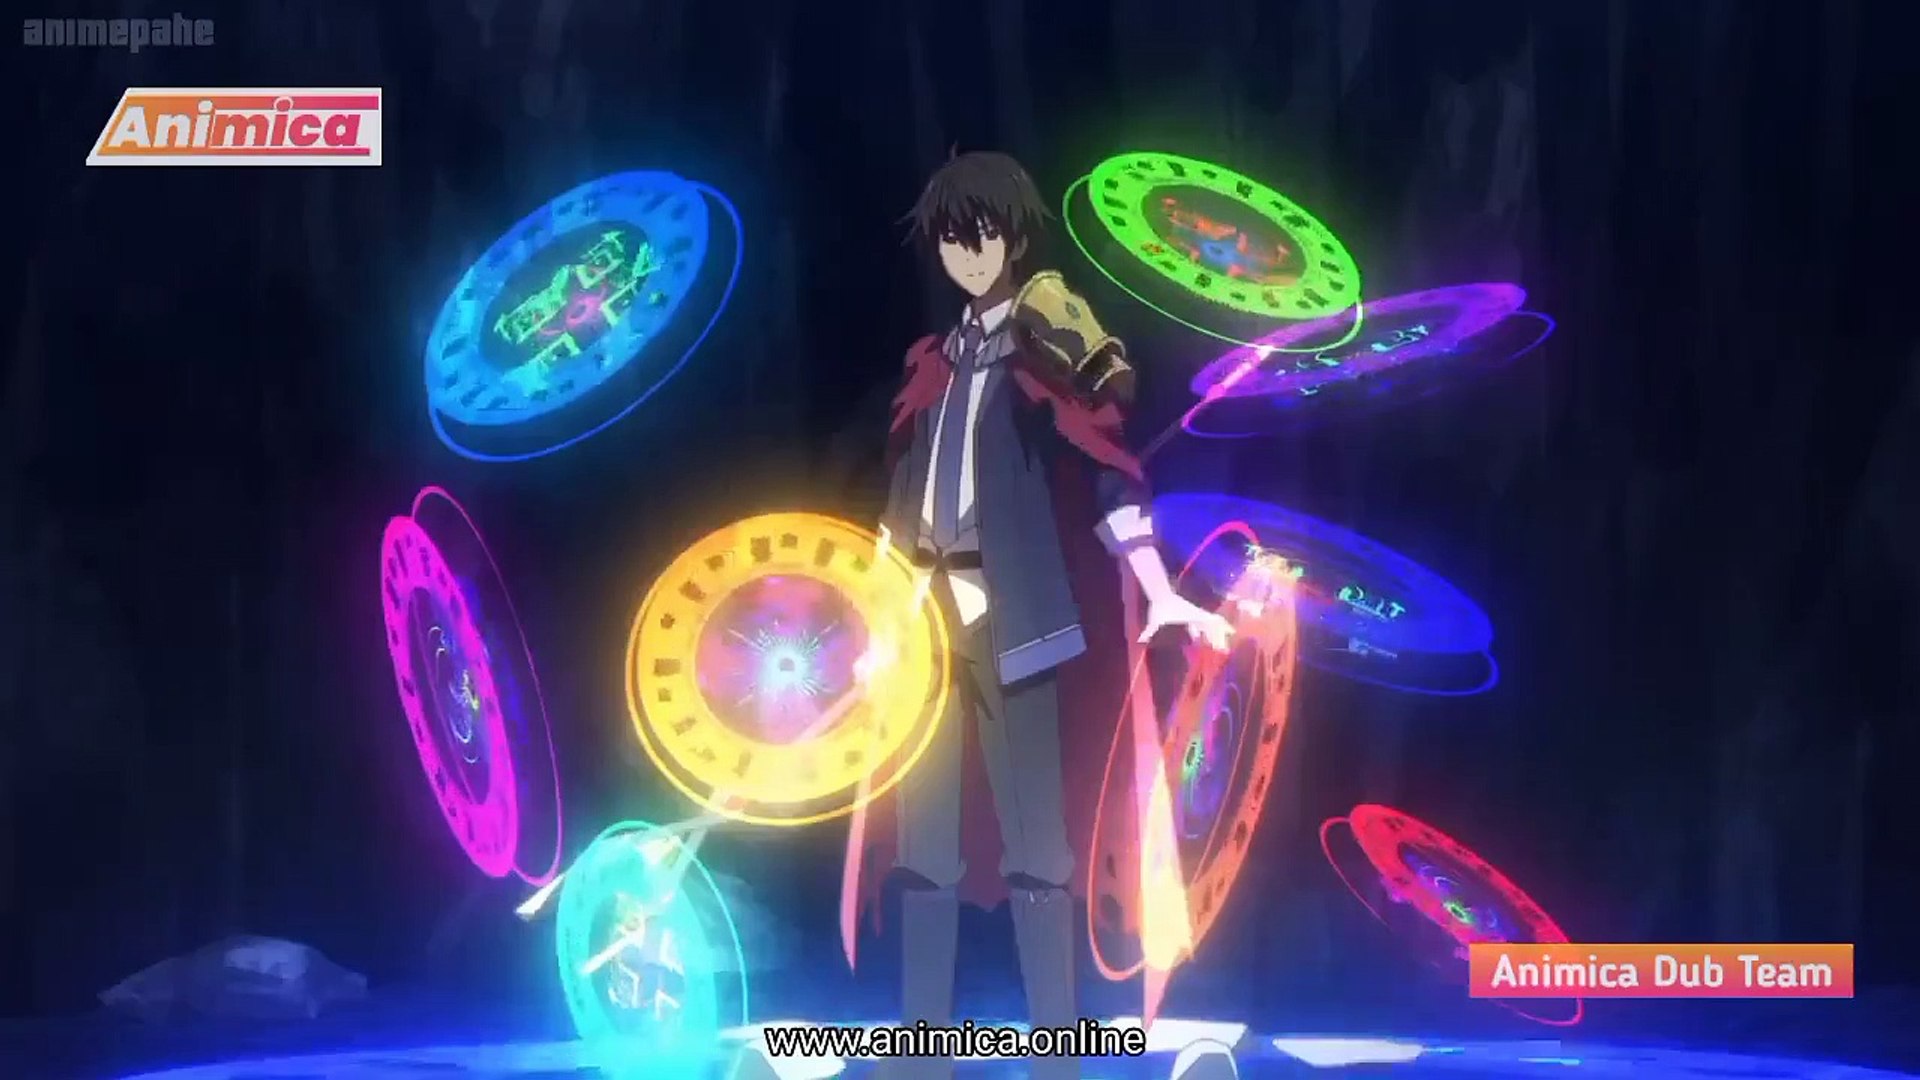 The Greatest Demon Lord is Reborn As A Typical Nobody - EP 6 English Subbed  - video Dailymotion